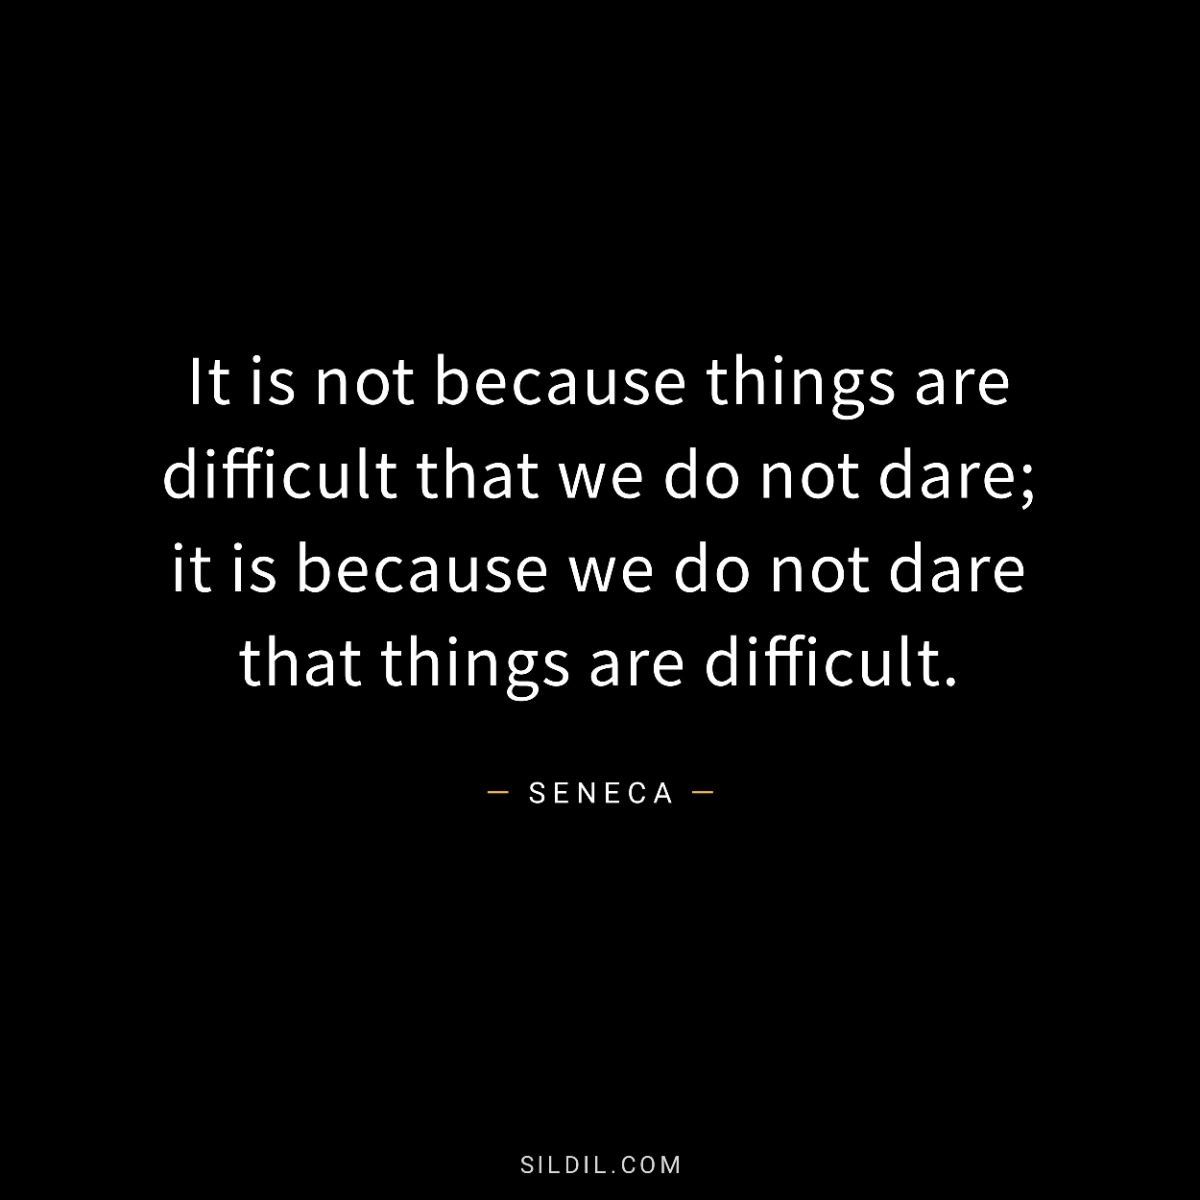 It is not because things are difficult that we do not dare; it is because we do not dare that things are difficult.